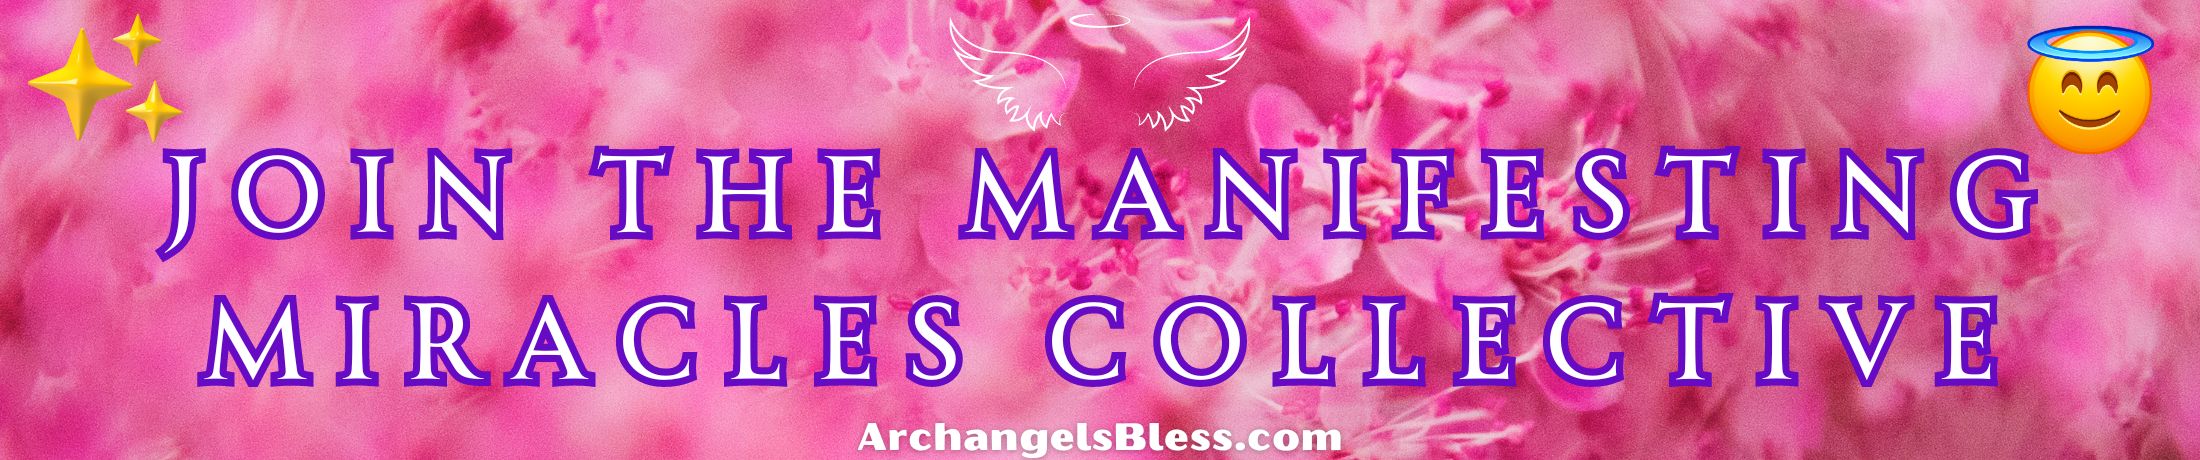 Join The Manifesting Miracles Collective